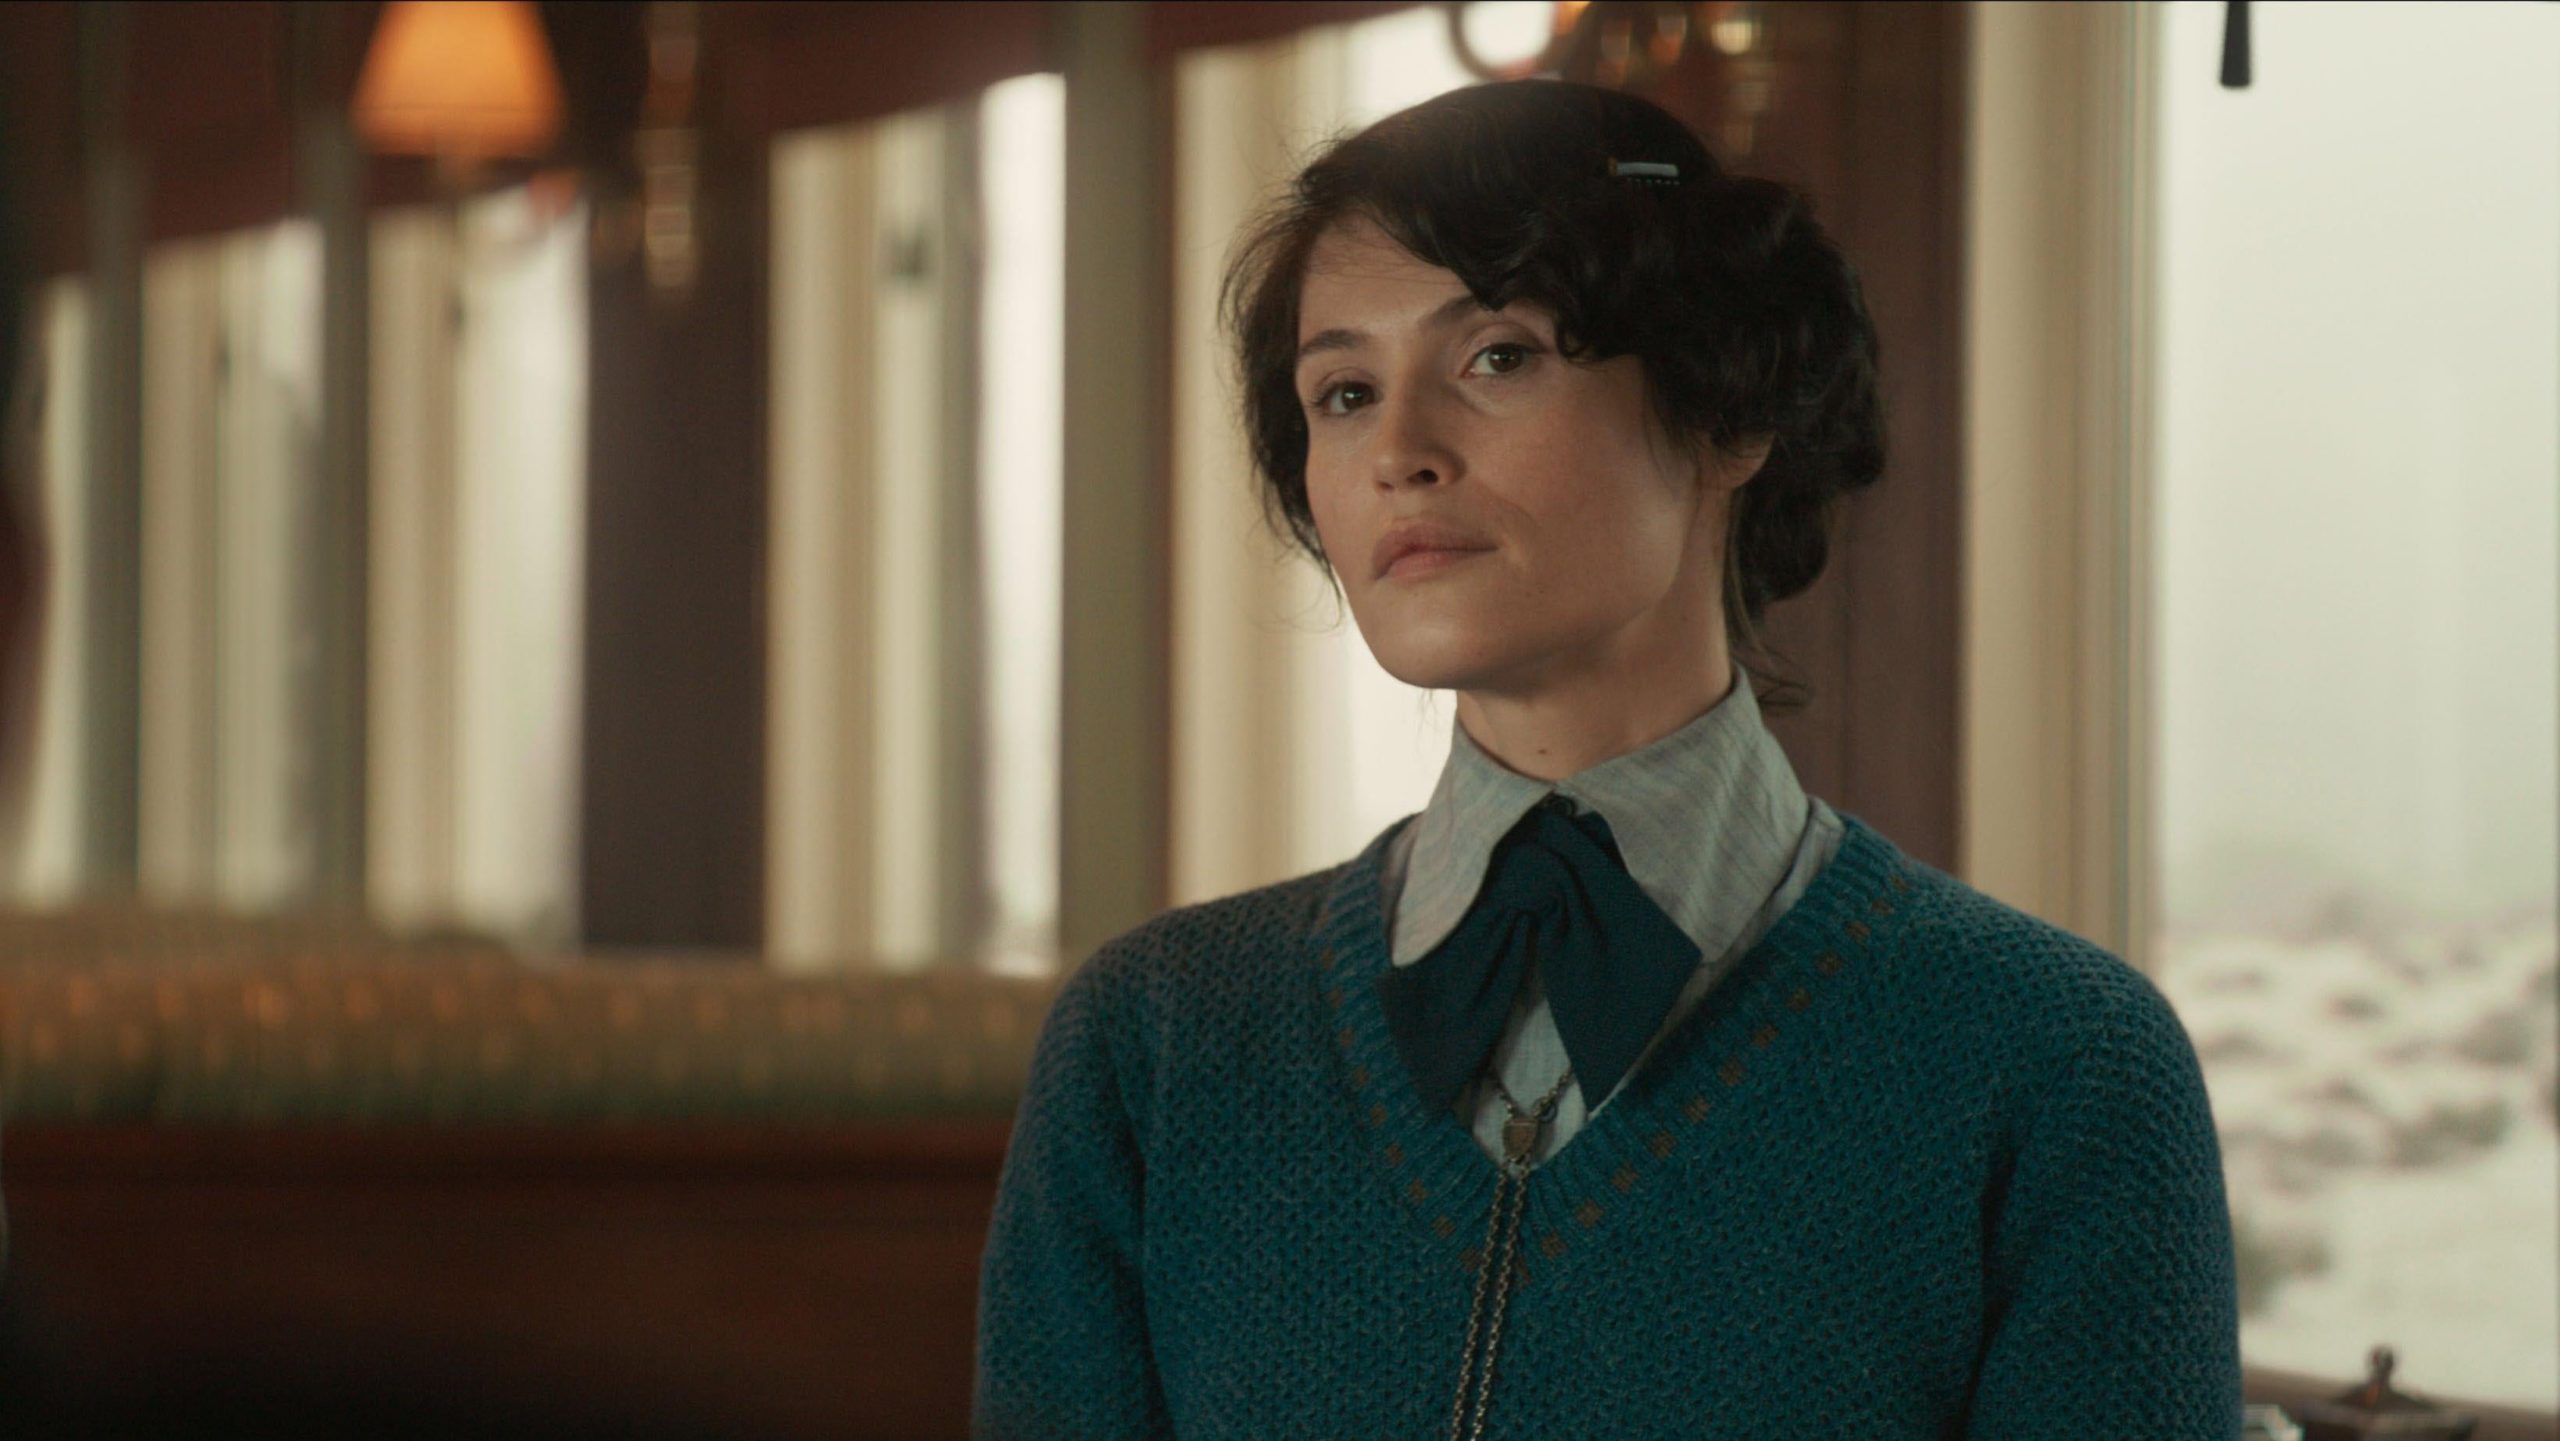 Gemma Arterton's Polly is one of the film's highlights. (Image: 20th Century Studios)